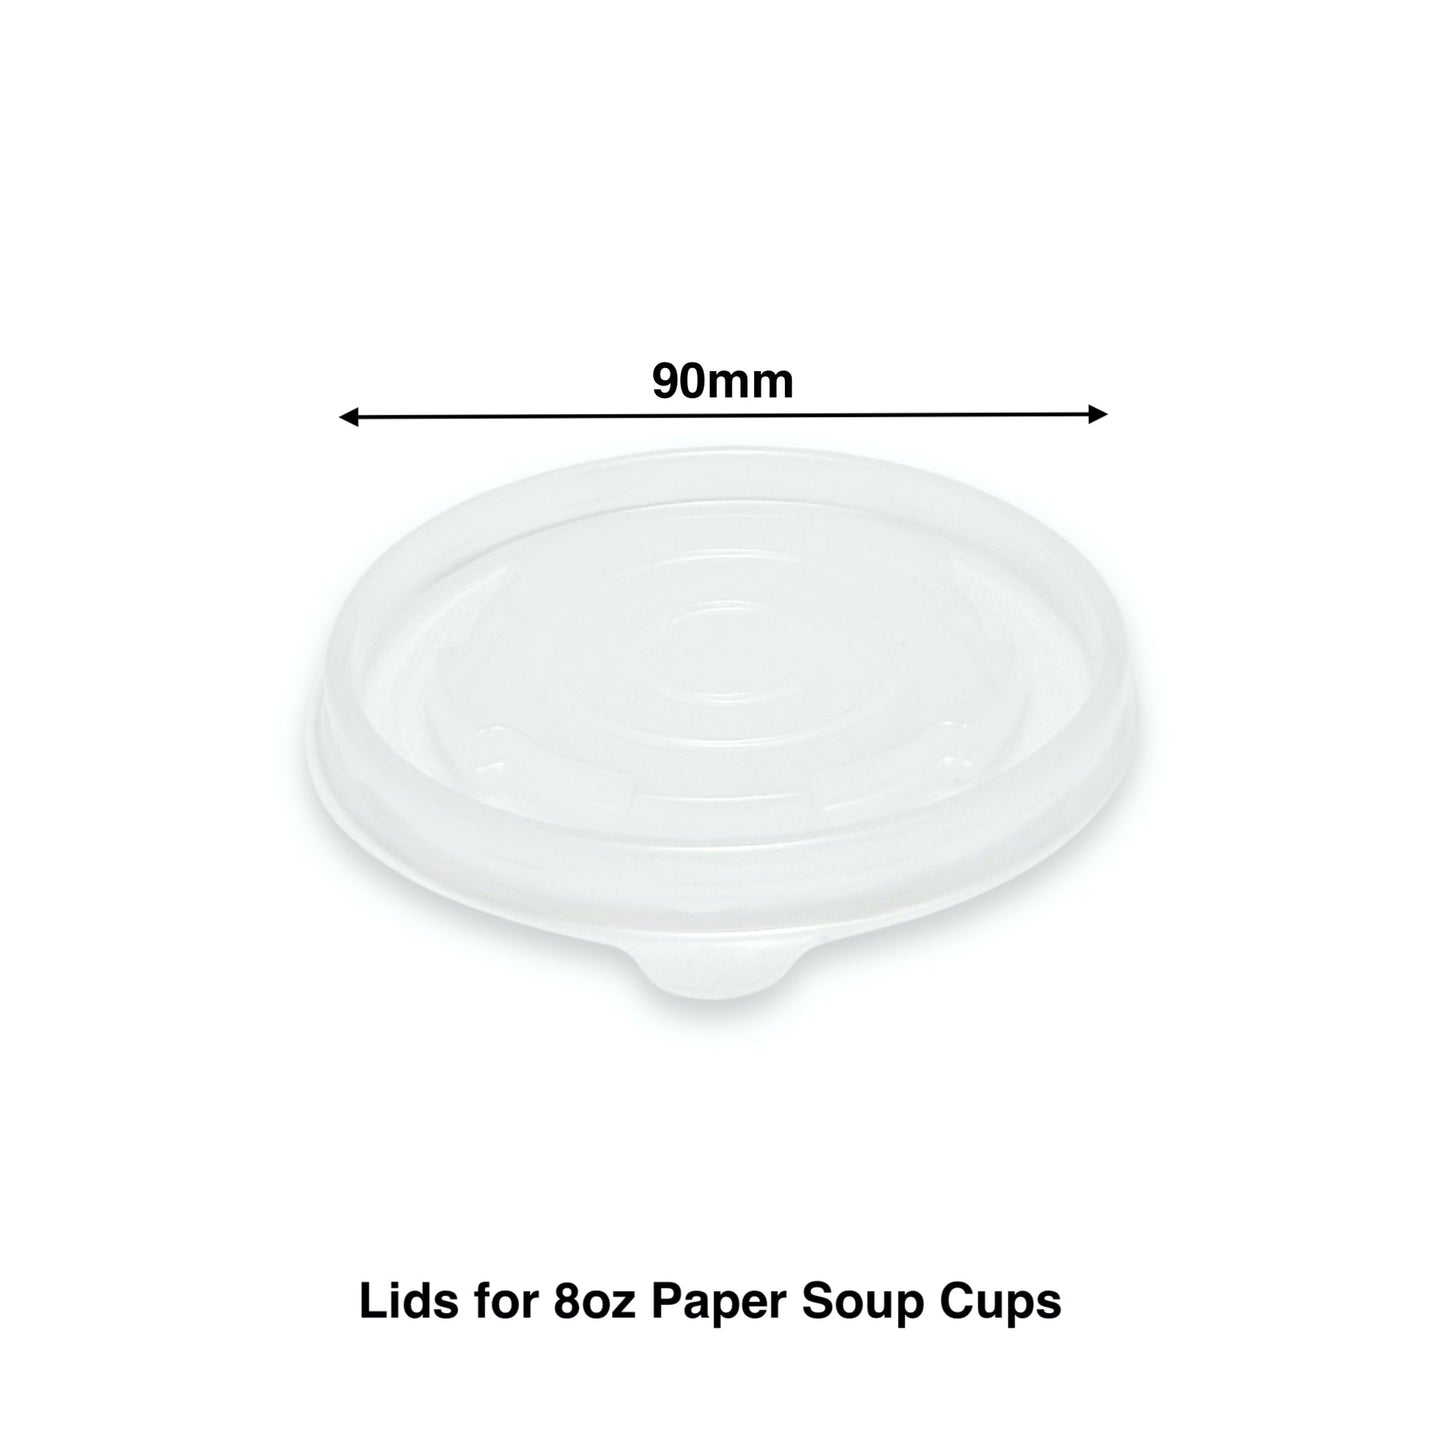 KIS-SL90G | 90mm PP Lid for 8oz Paper Soup Container; From $0.027/pc